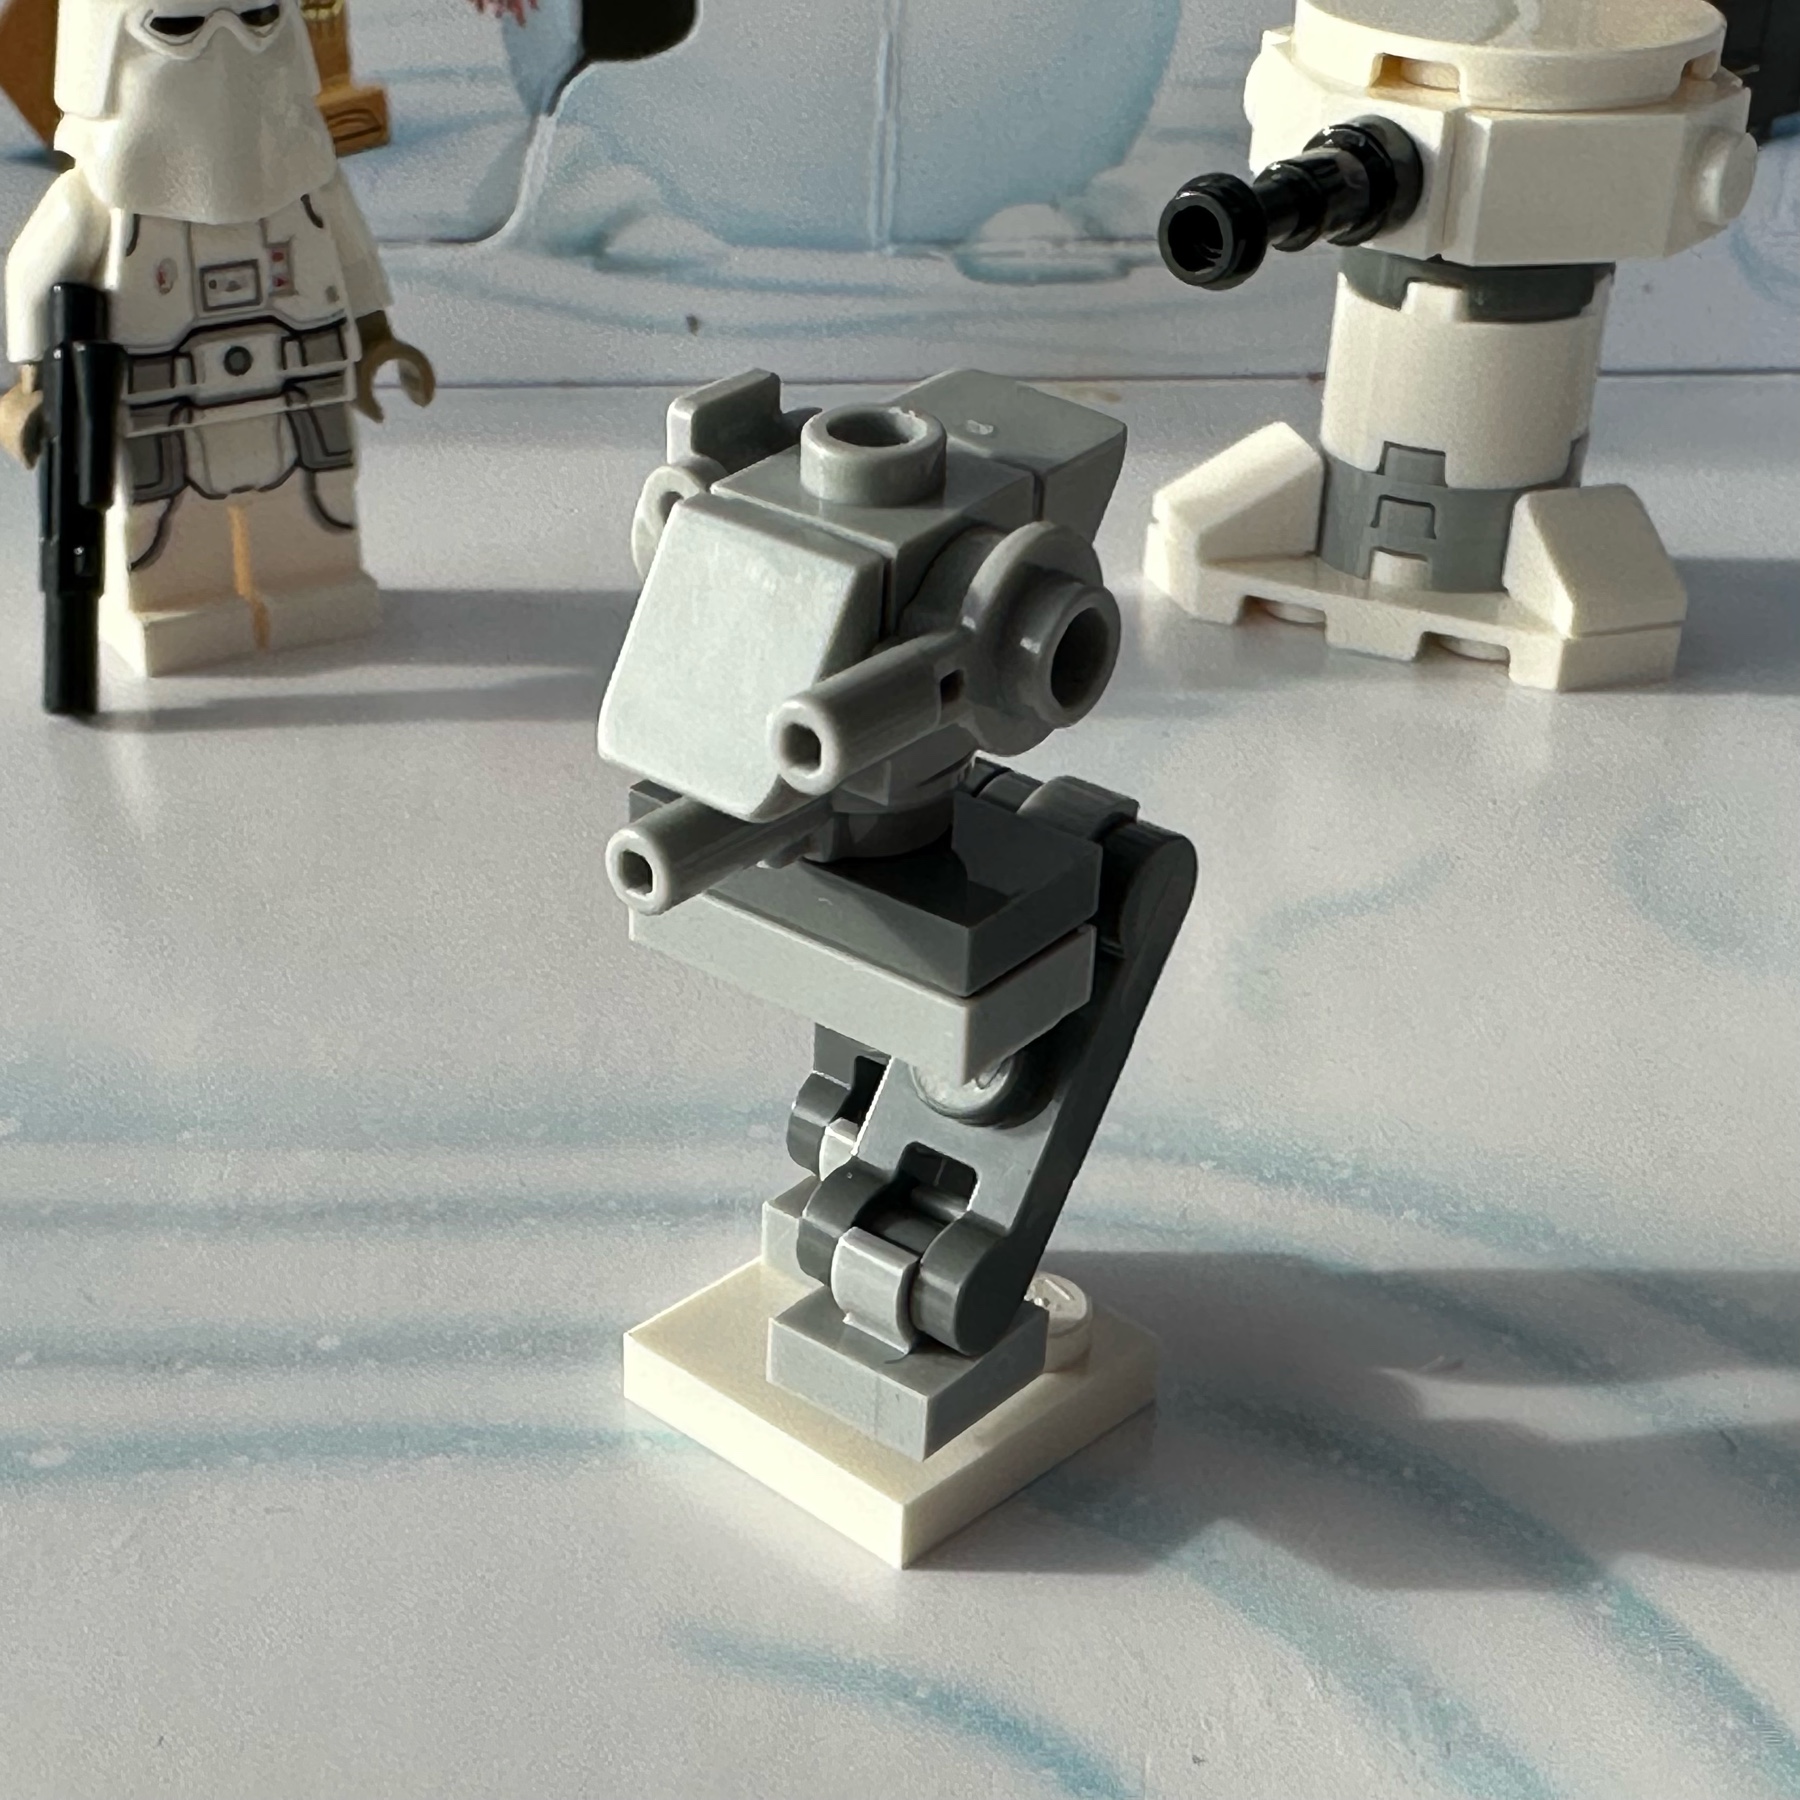 LEGO microscale build of an AT-ST walker from Star Wars